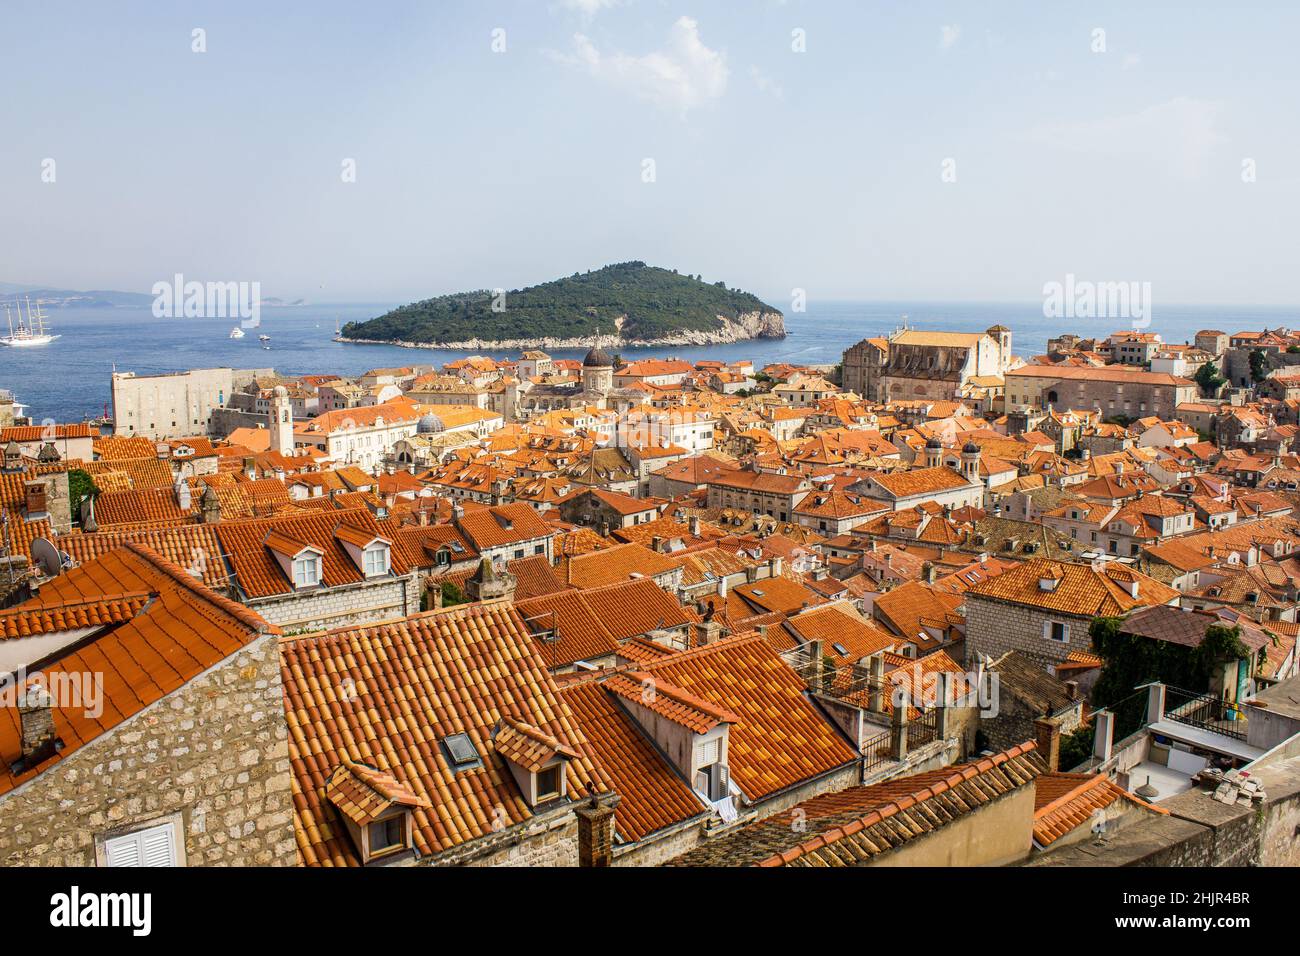 View of Traditional Colorful Rooftops with Franciscan Church and Monastery Bell Tower in Dubrovnik Stock Photo